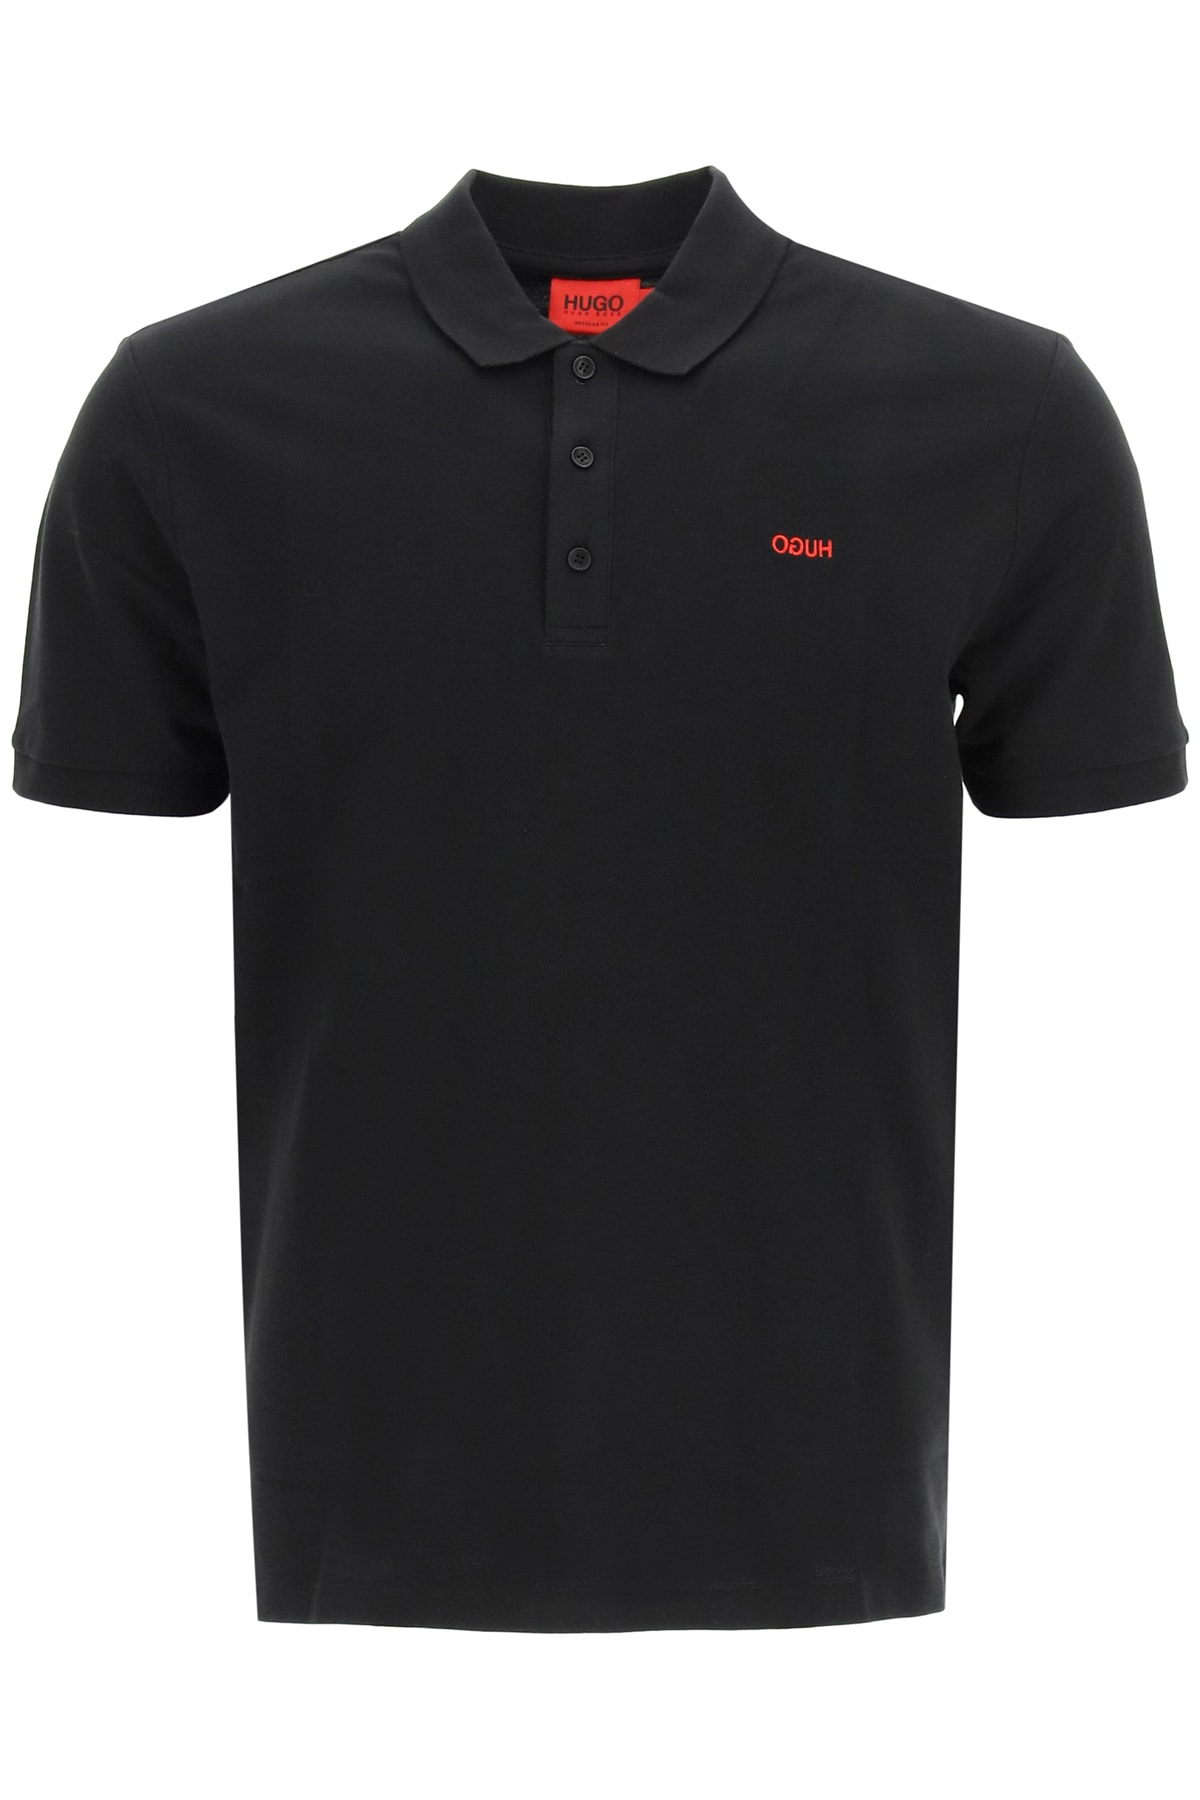 Hugo Boss Polo With Inverted Logo